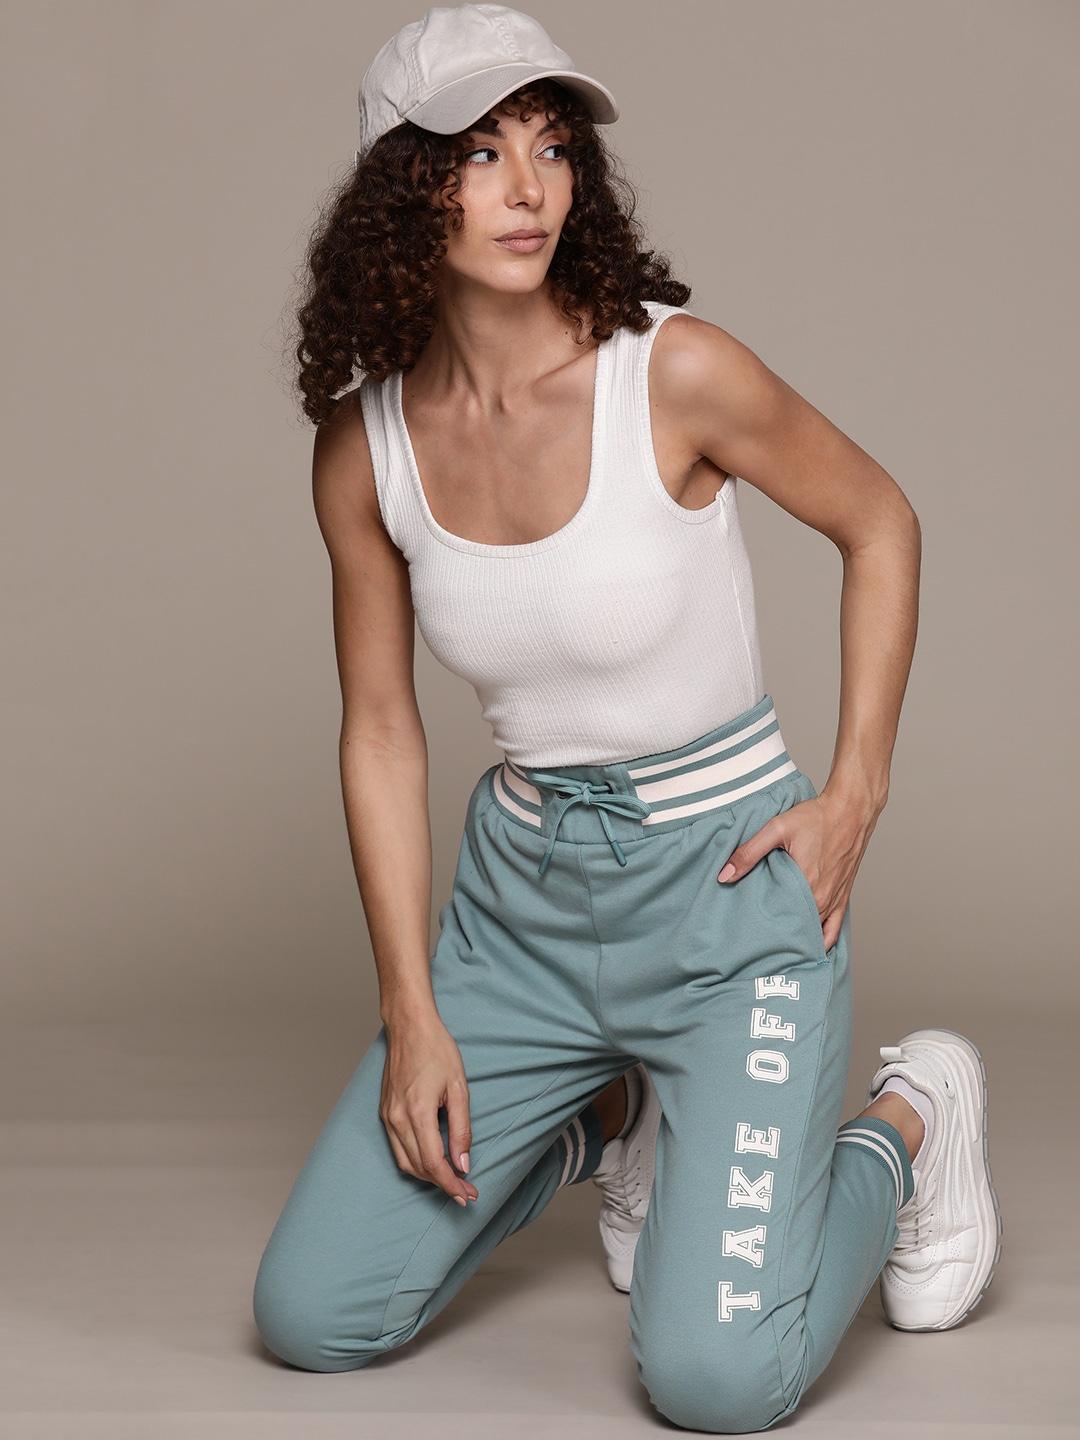 the roadster lifestyle co. re/lax women tapered joggers with contrast print